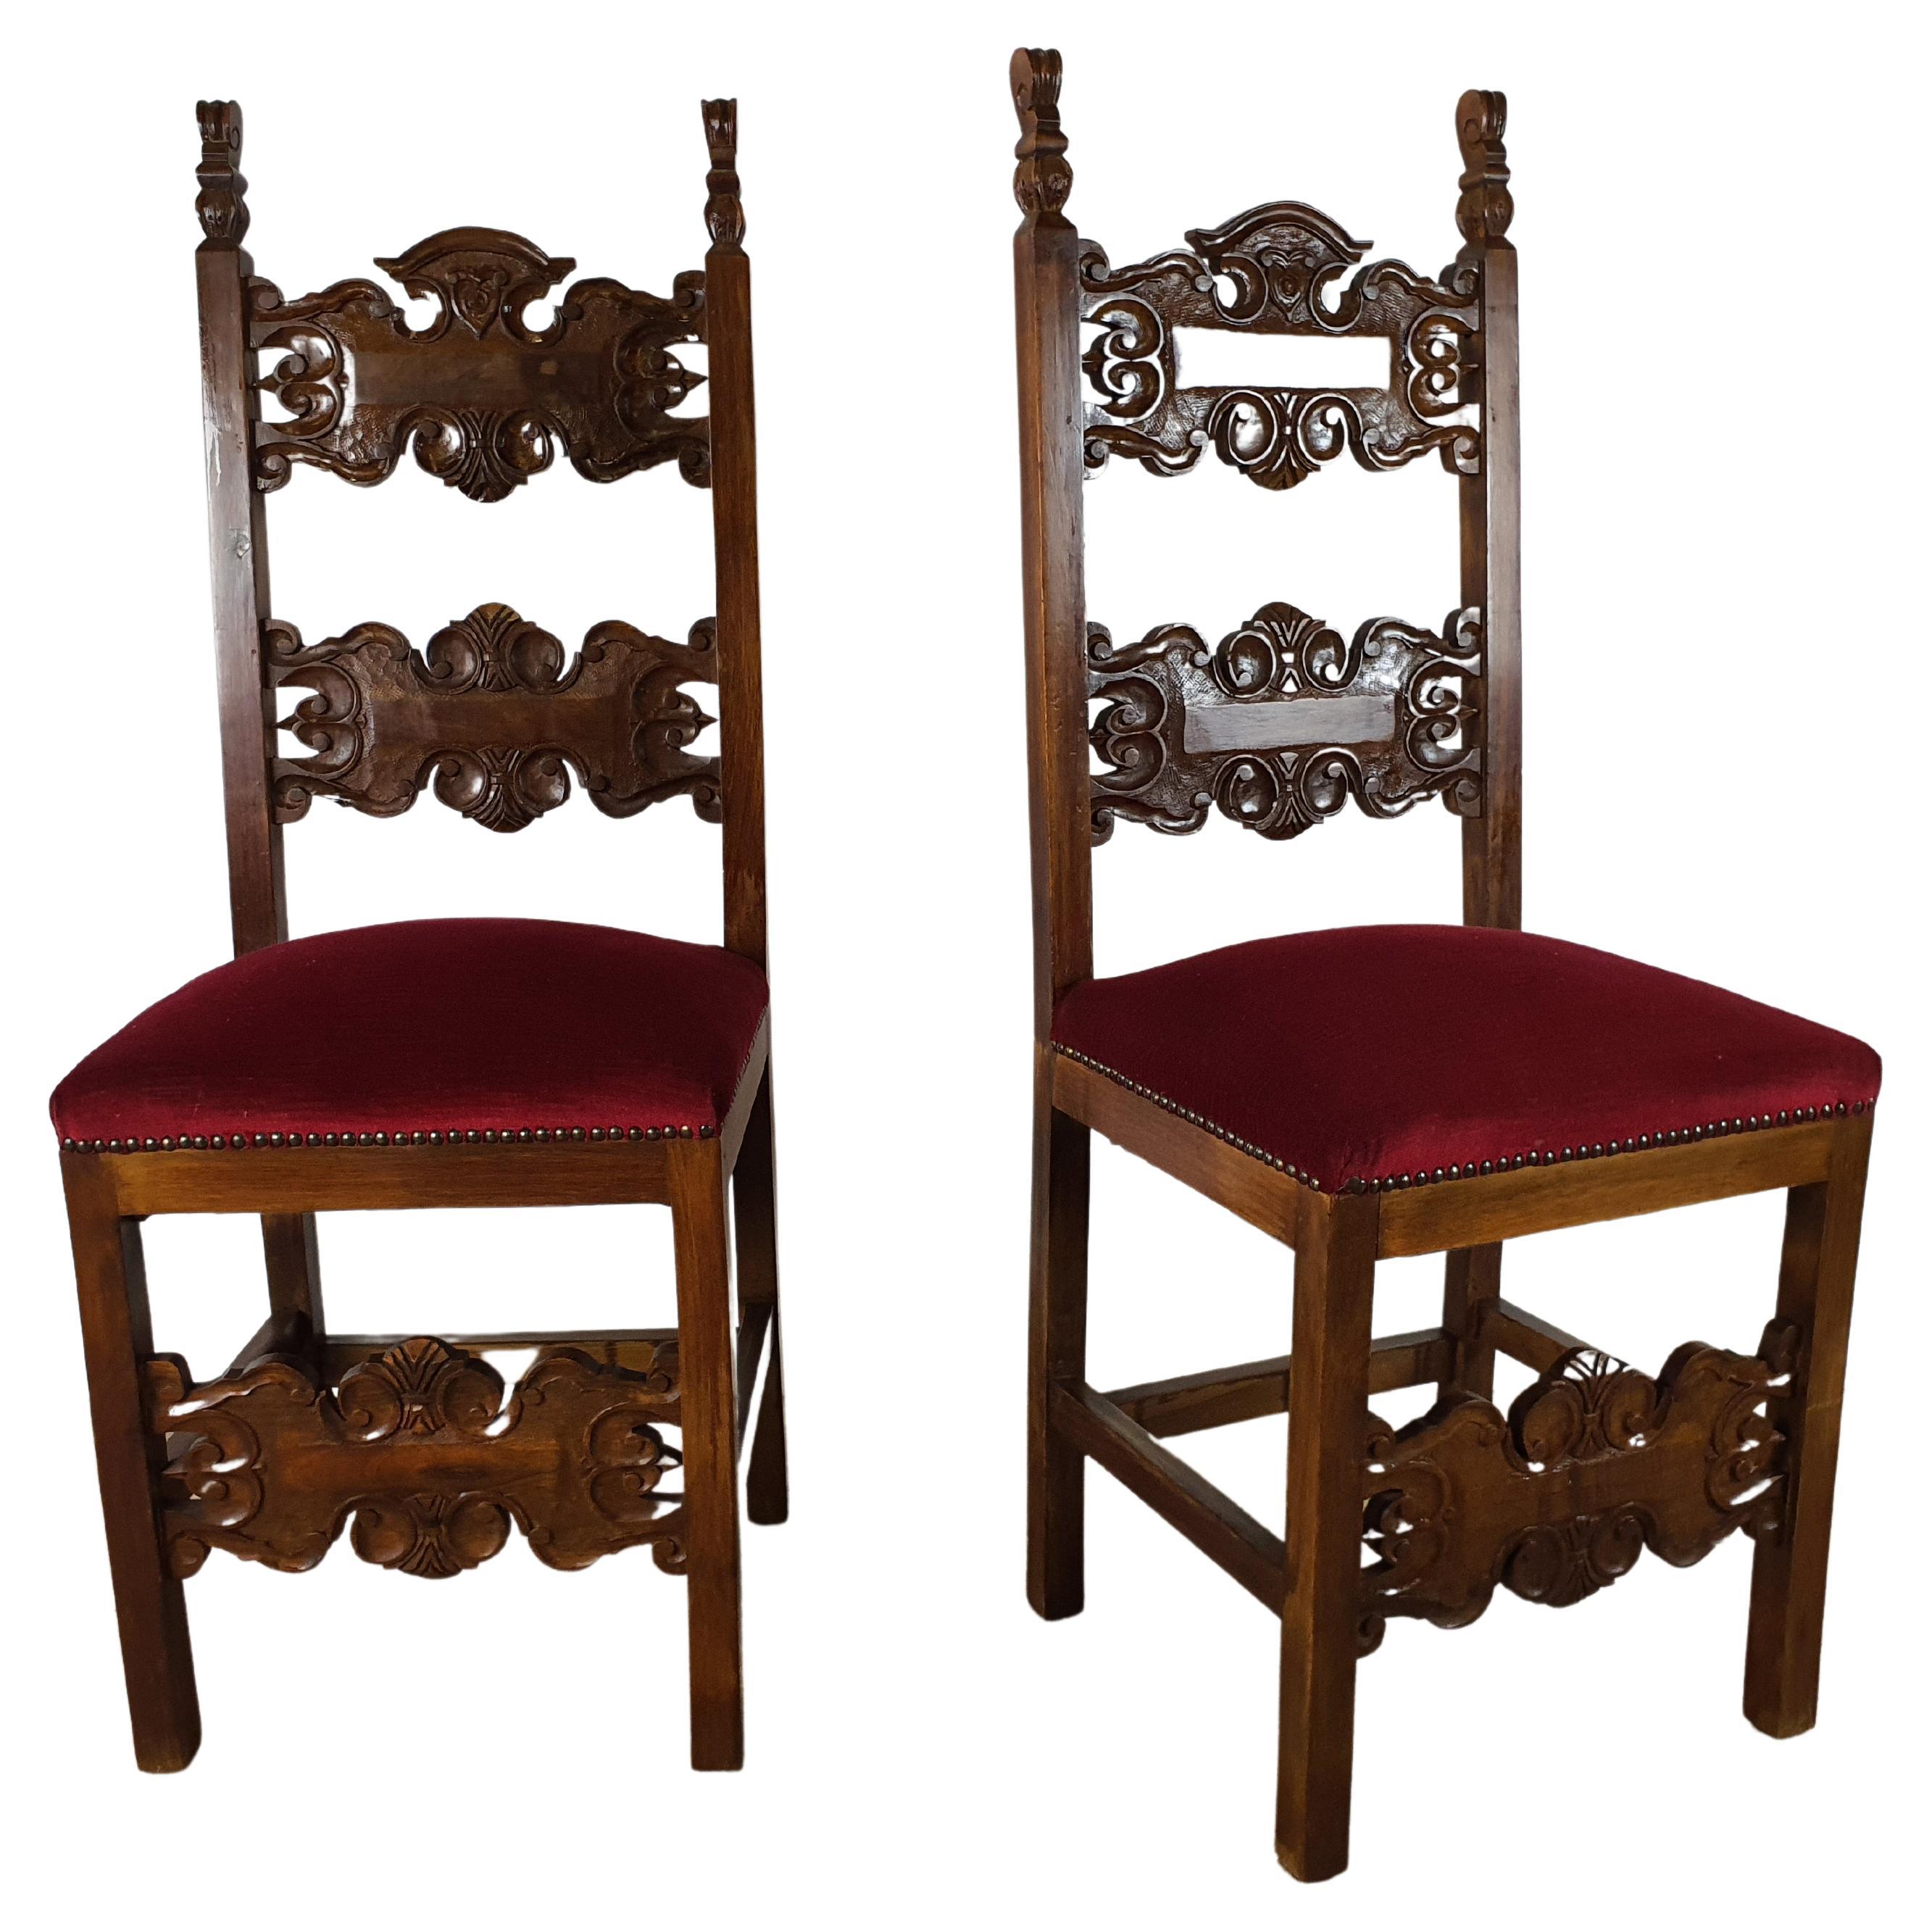 Pair of Renaissance Chairs from the Early 1900s